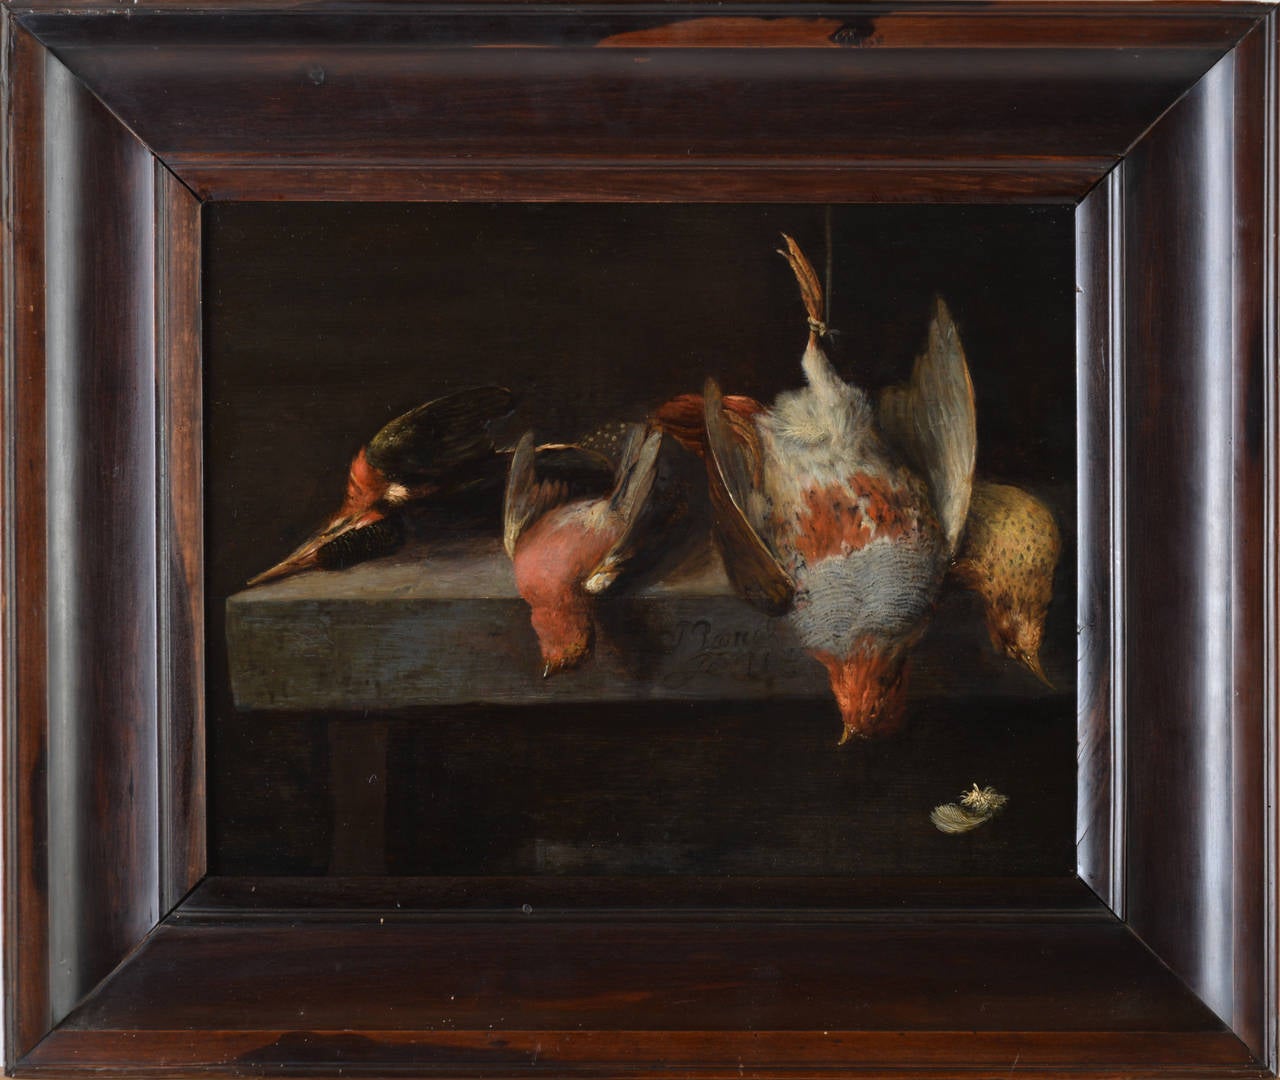 Fantastic painting of Jan Vonck (Torun, 1631 - Amsterdam, 1664). Still life dipicting a kingfisher, a bullfinch, a partridge and a titlark on a ledge, signed lower centre j. vonck - fecit a, oil on panel, 33x42 cm.

He was the son and pupil of his